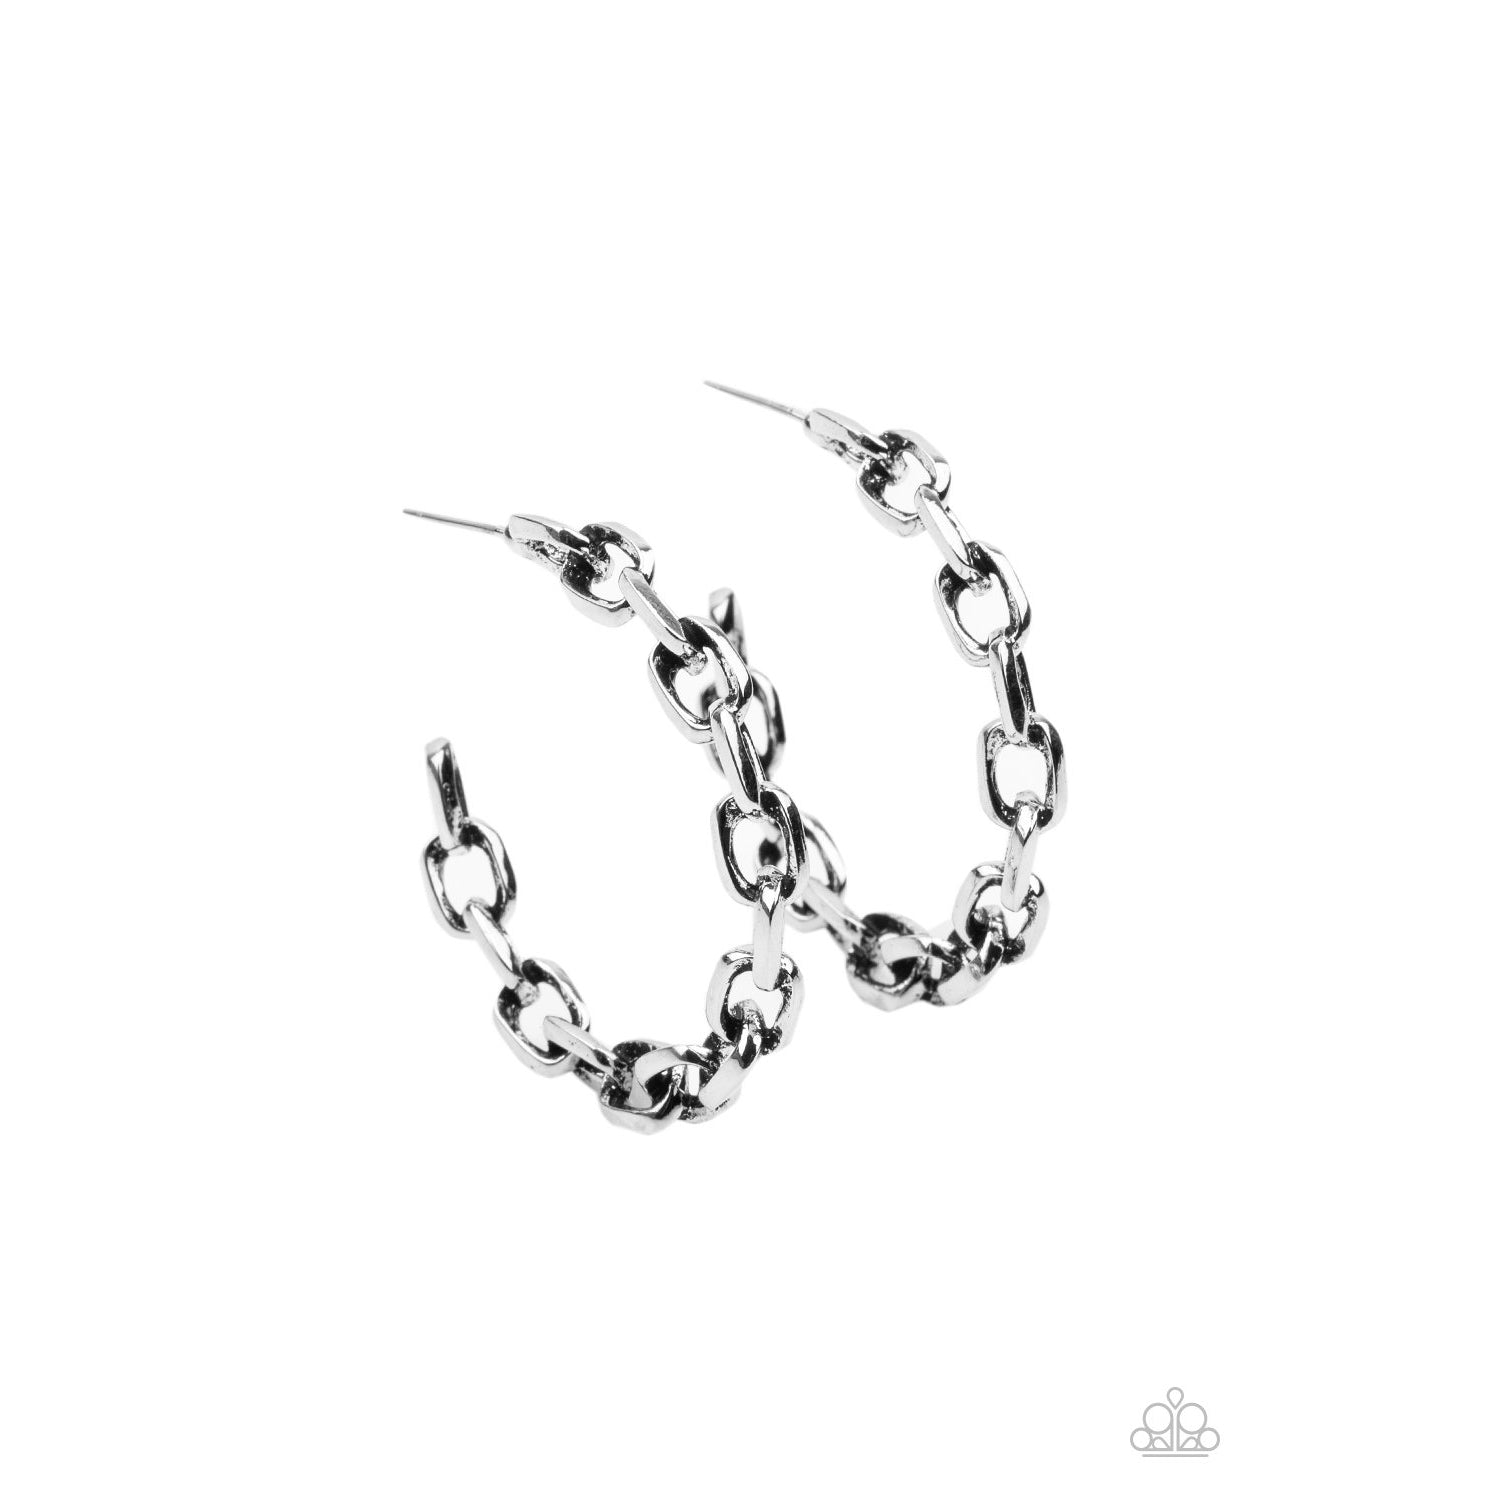 Stronger Together - Silver Chain Earrings | Paparazzi Accessories - GlaMarous Titi Jewels